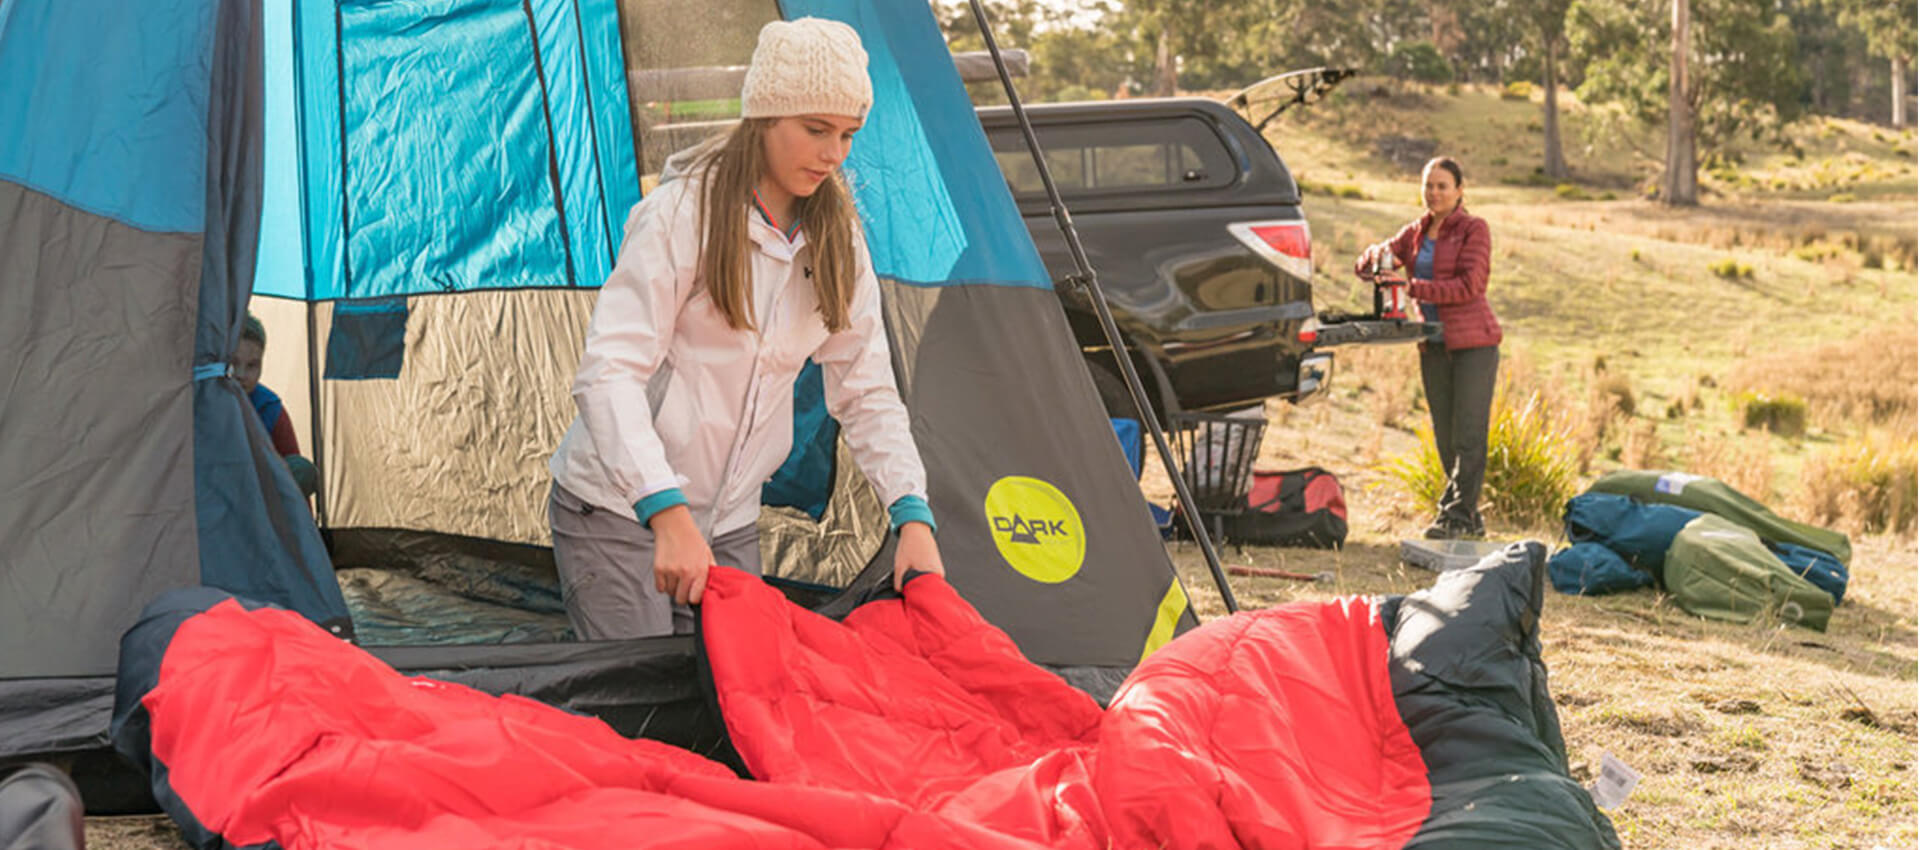 Woman fluffing out a sleeping bag for use in a pitched tent